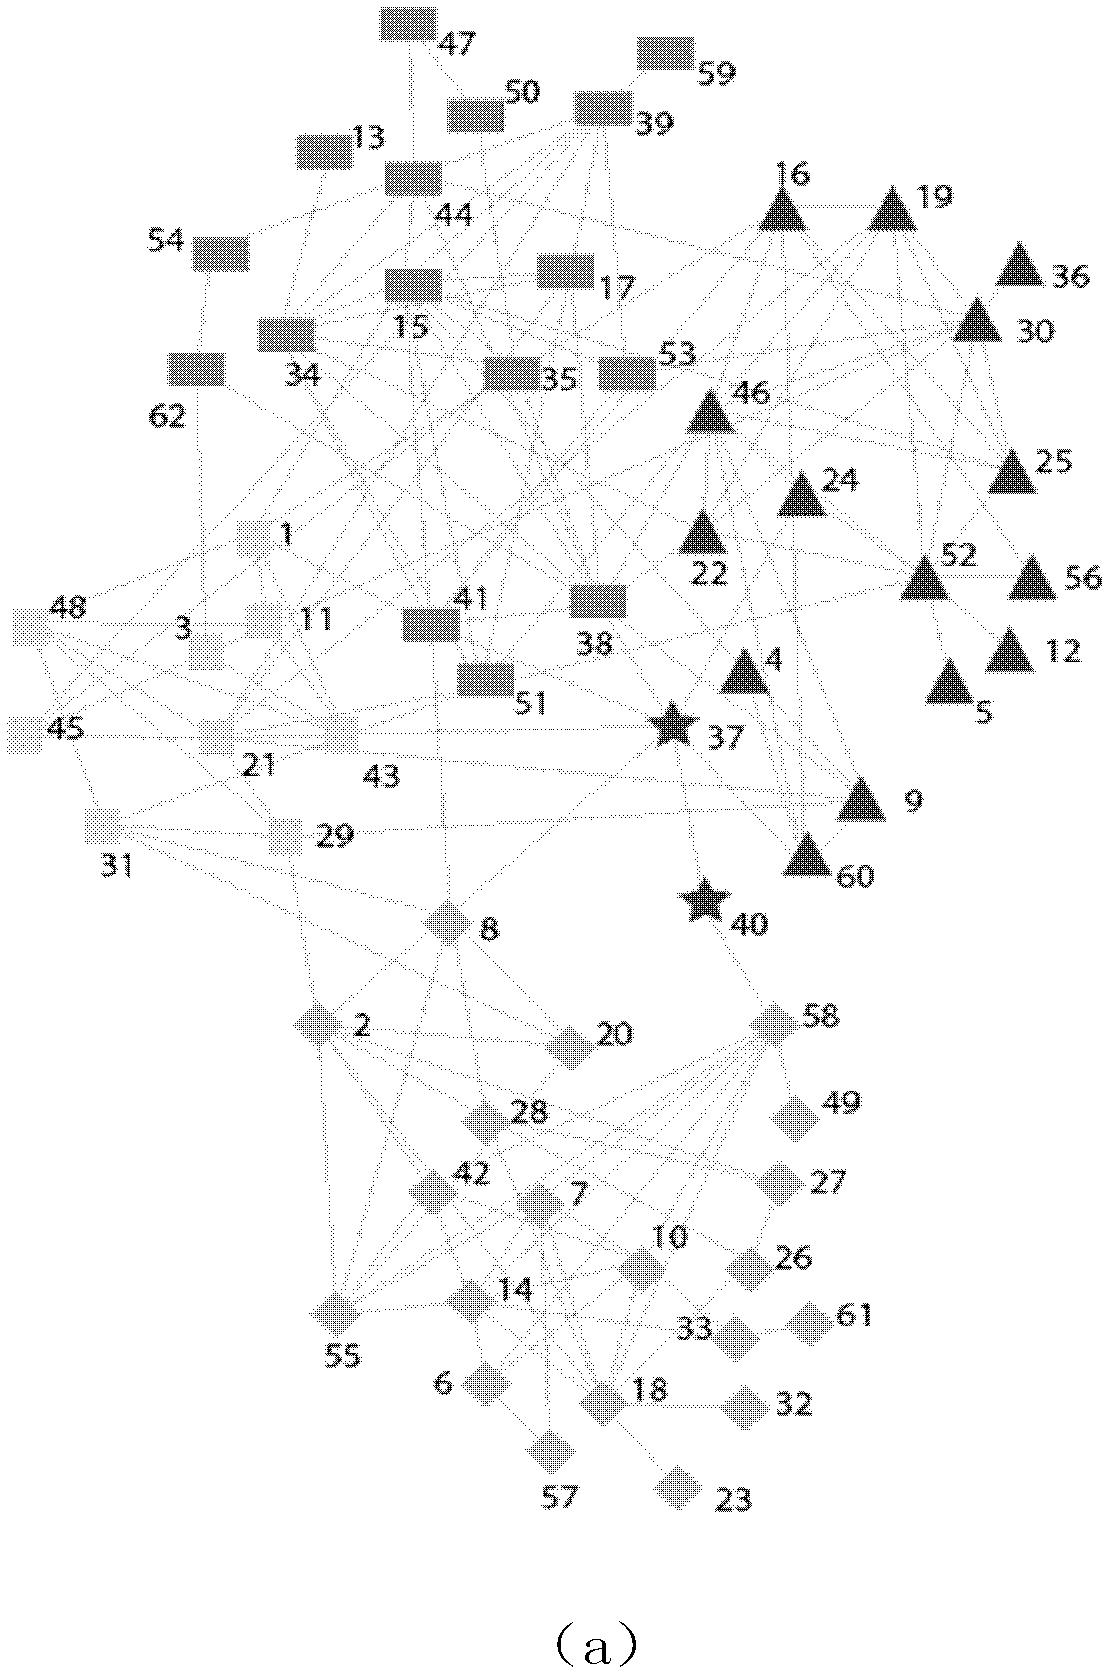 Network community division method based on simulated annealing genetic algorithm